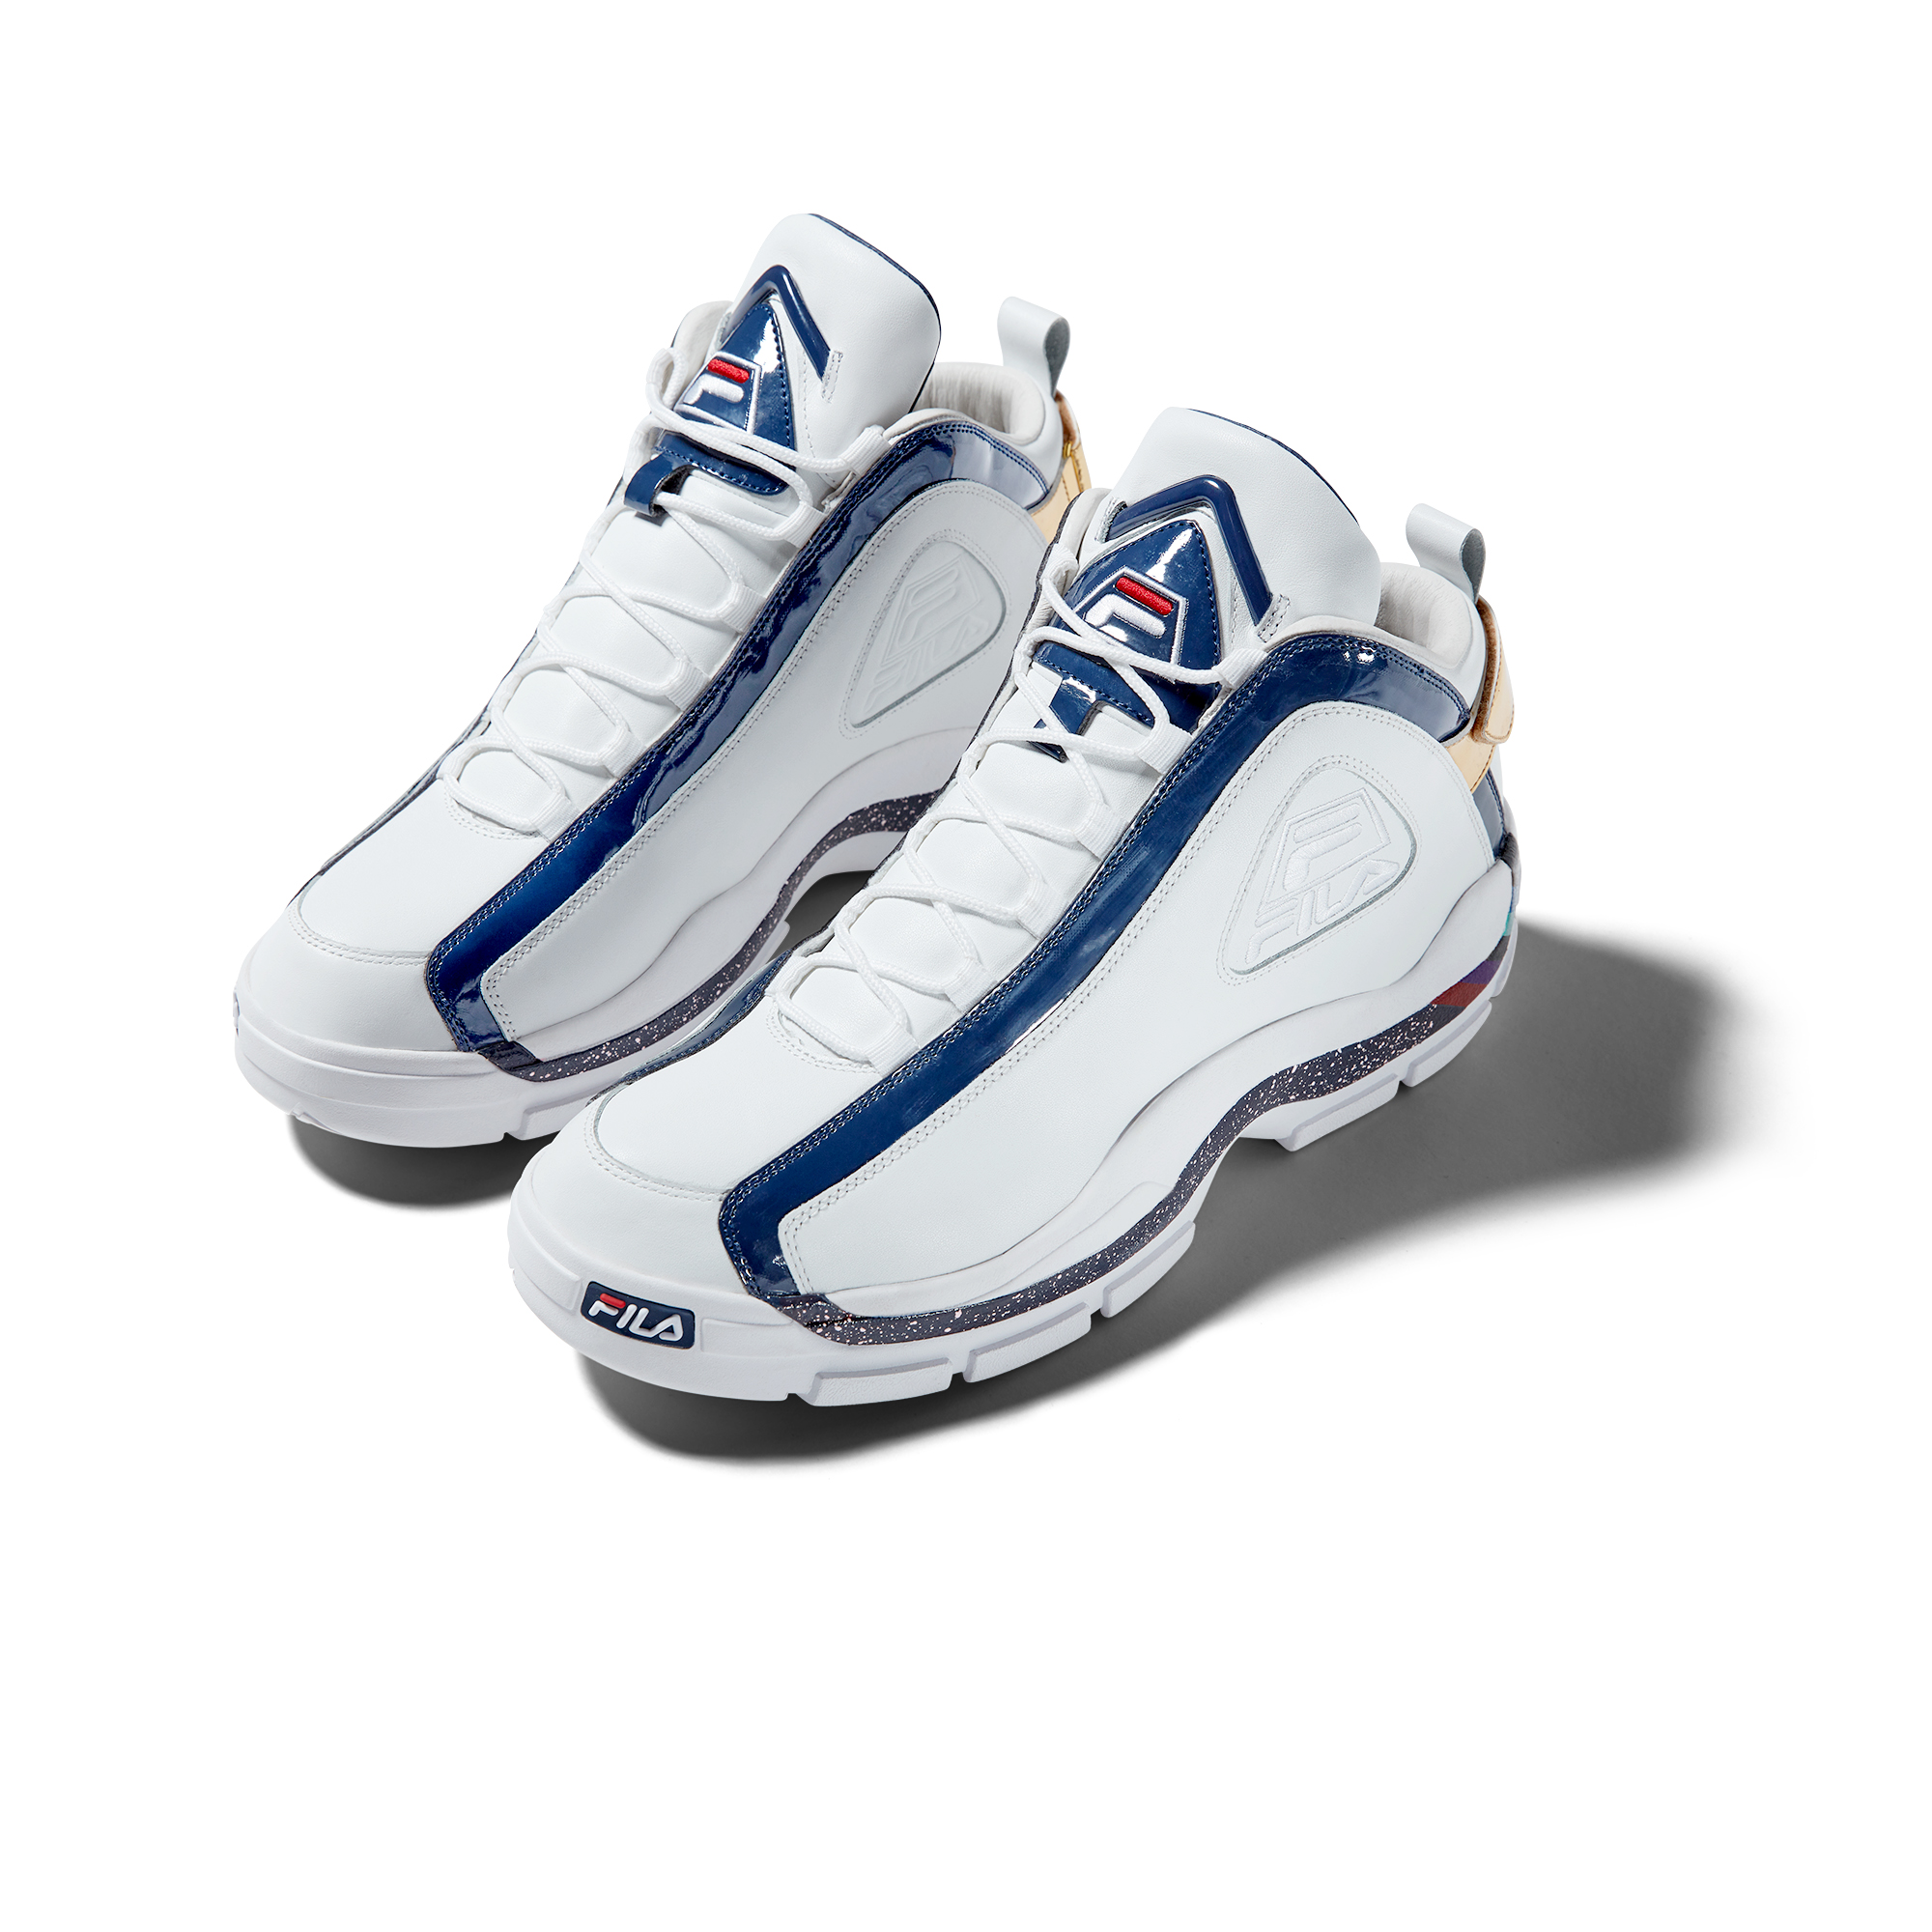 FILA to Drop Two Grant Hill 2 'Hall of Fame' Sneakers at